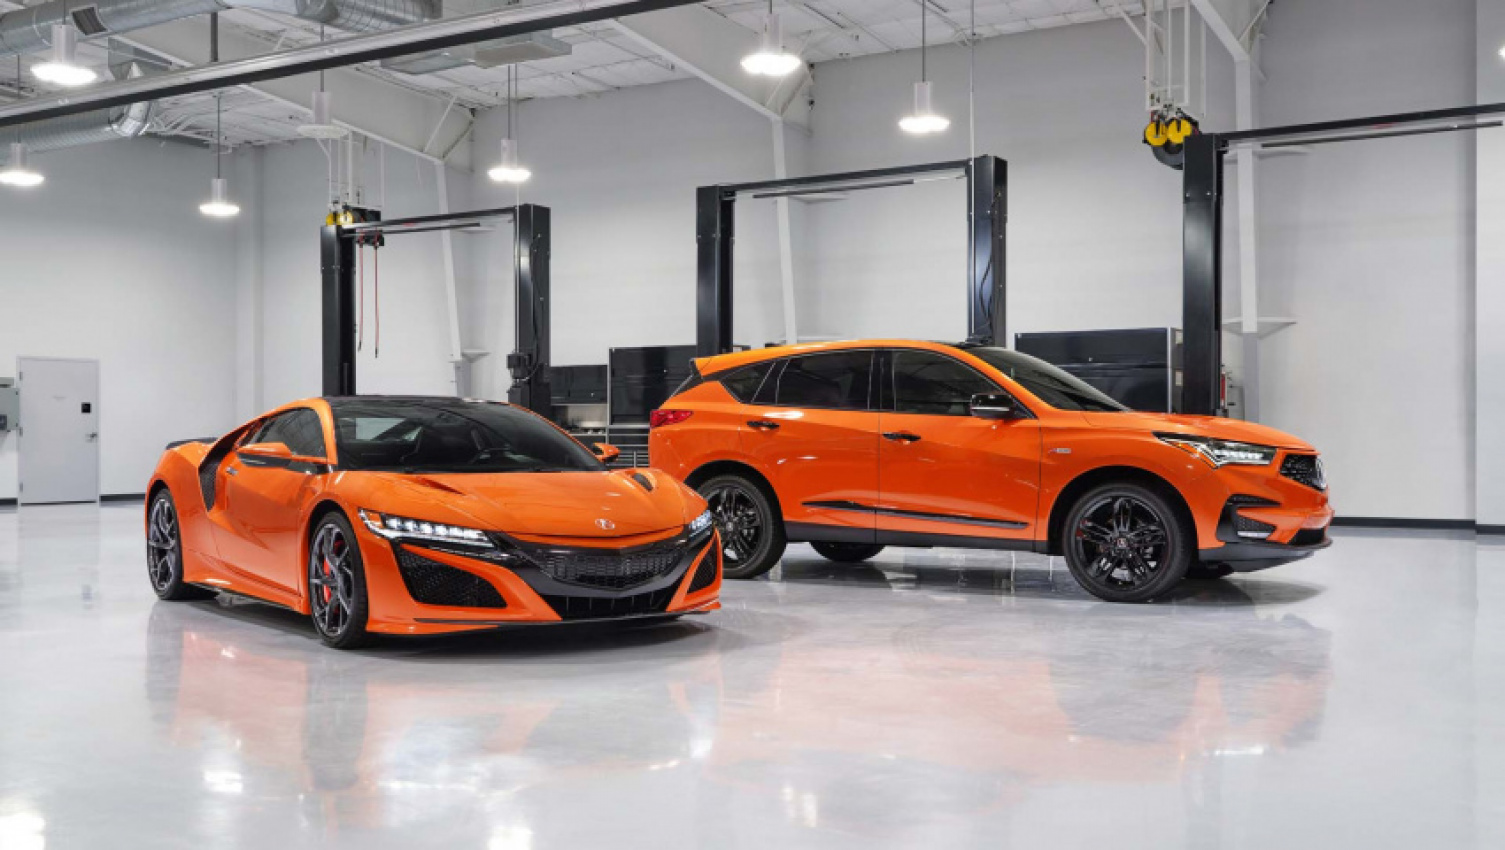 acura, autos, cars, honda, acura news, honda news, industry, luxury cars, acura and honda now certify used cars up to 10 years of age